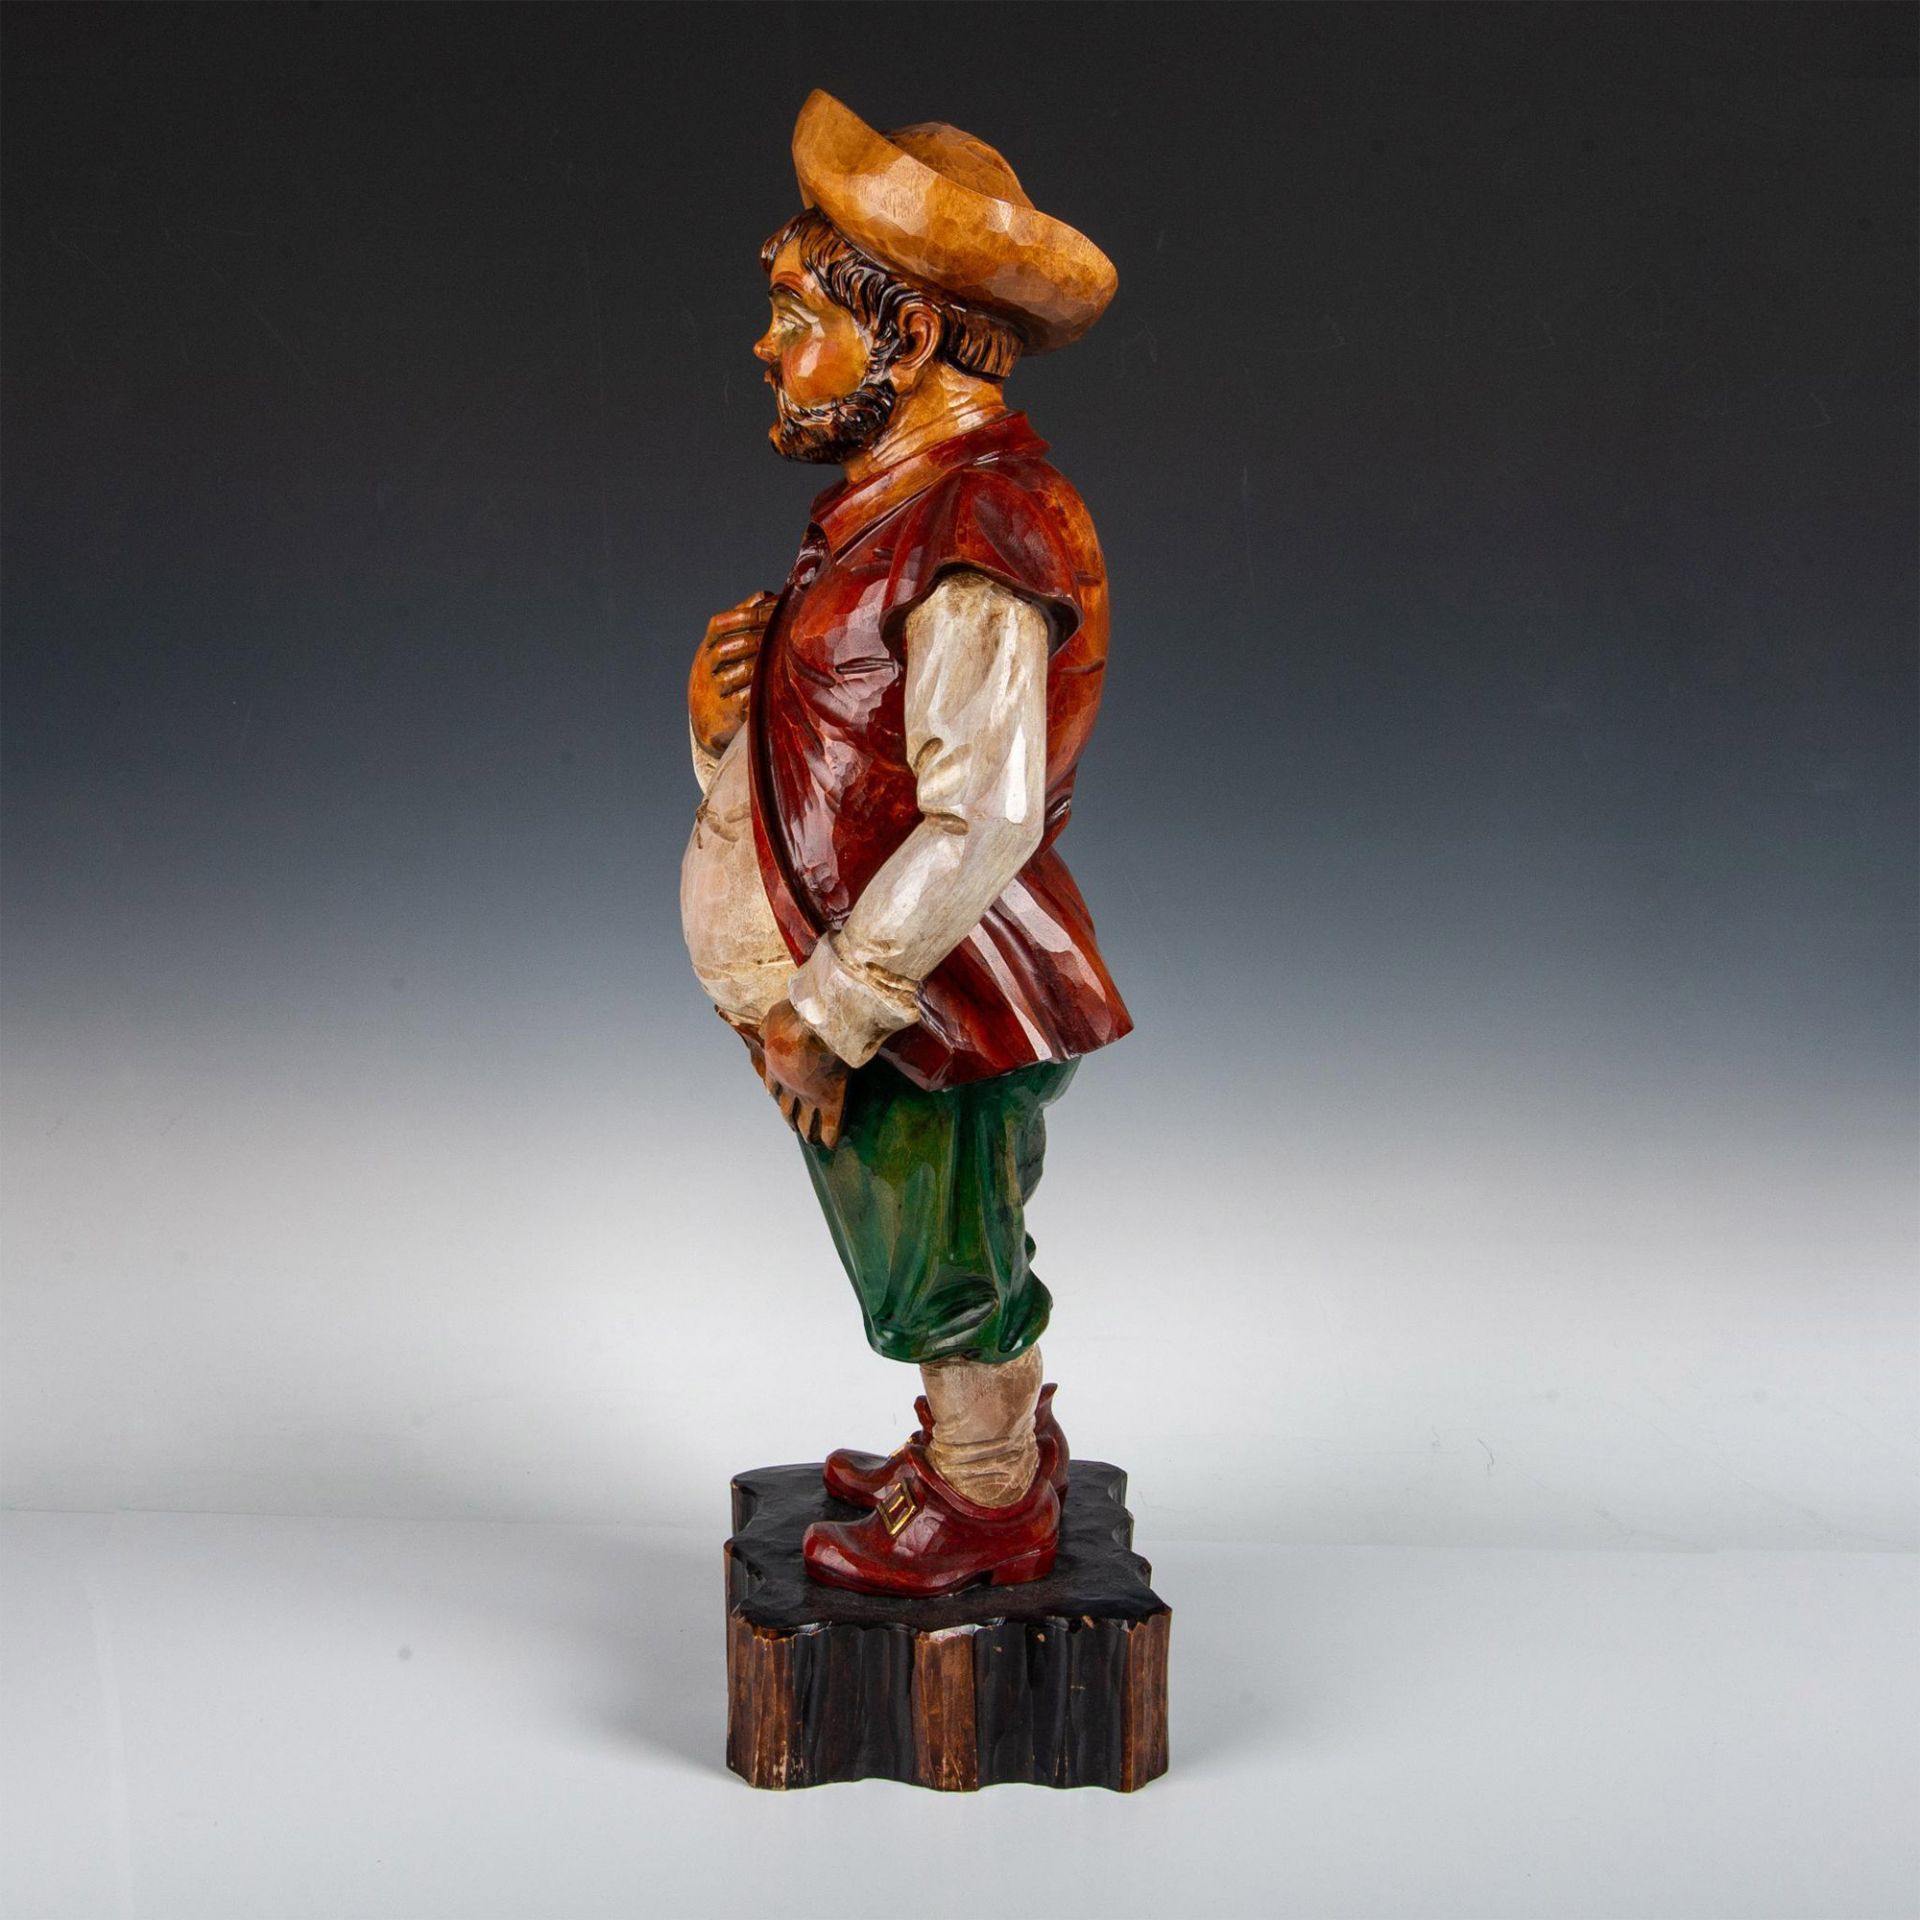 Ouro Artesania Carved Wooden Sancho Panza Sculpture - Image 3 of 5